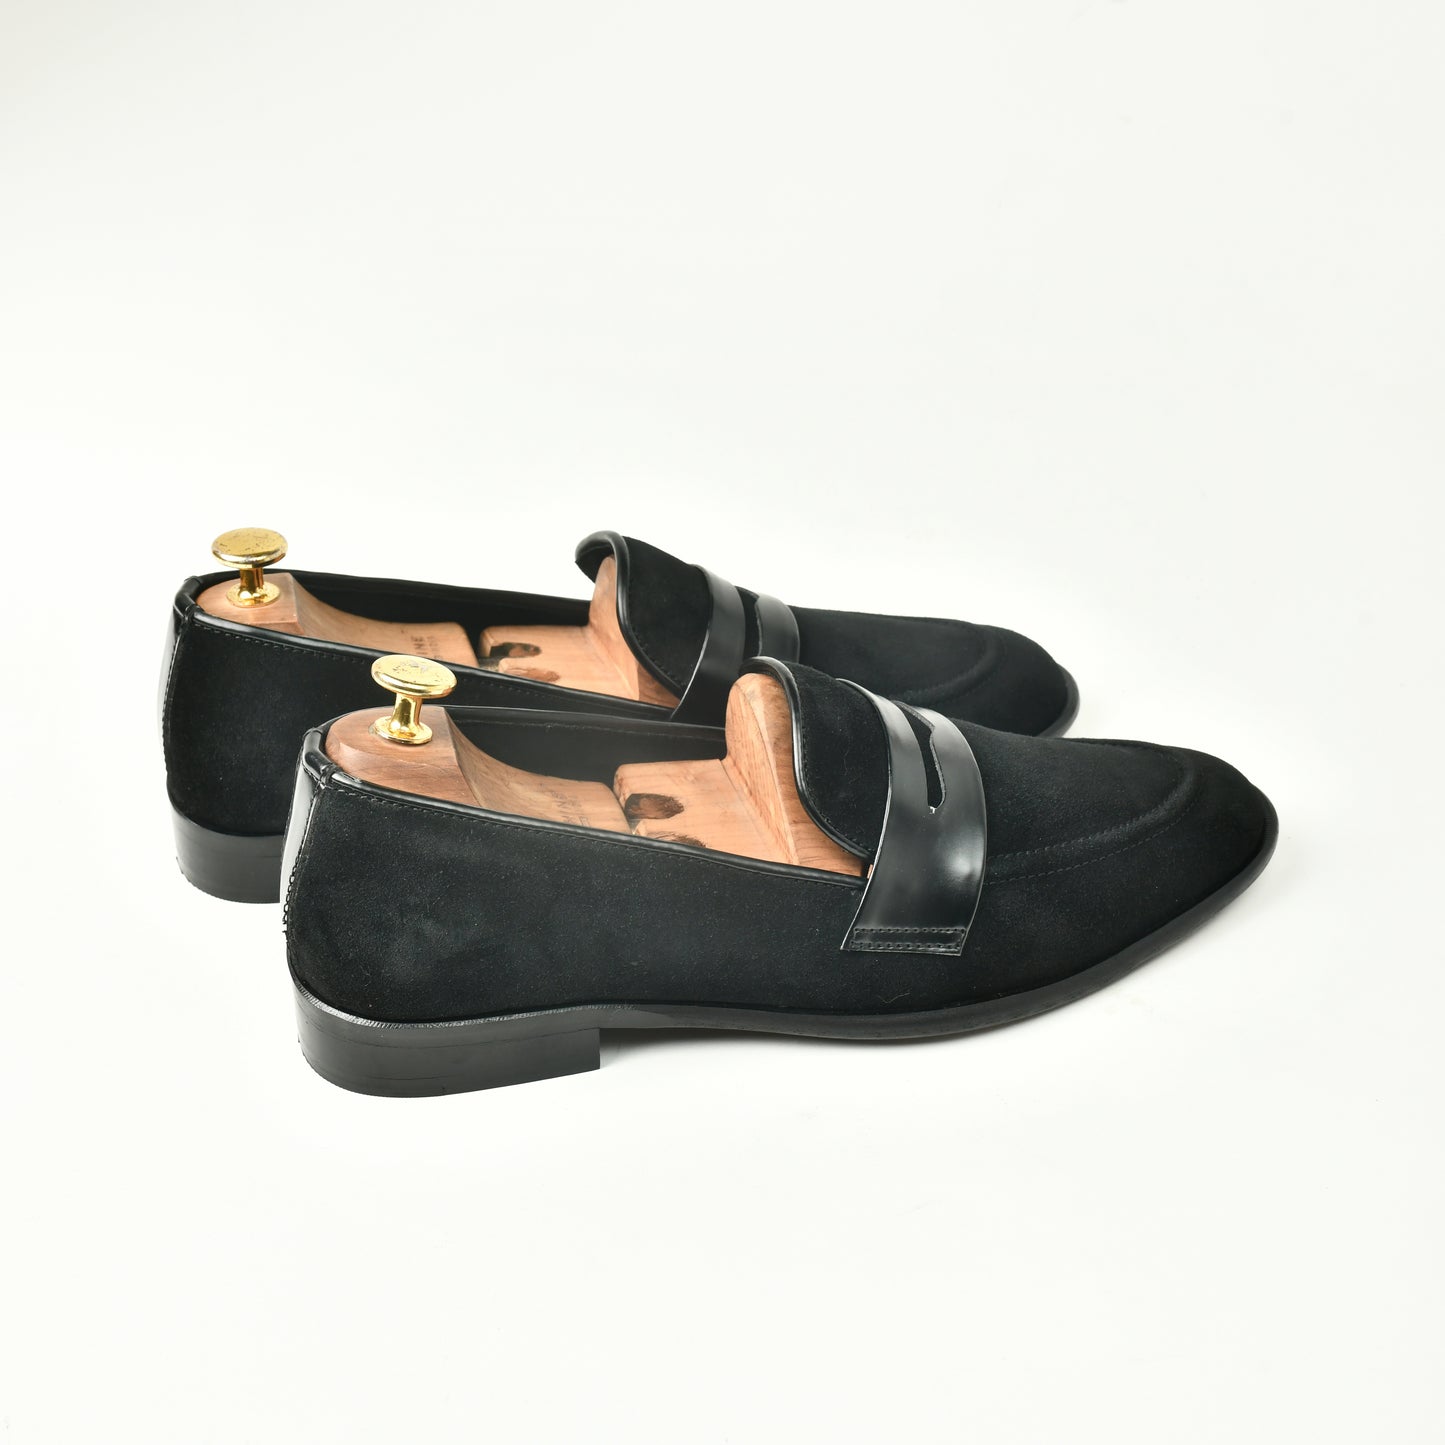 Suede Slip Ons with Saddle - Black